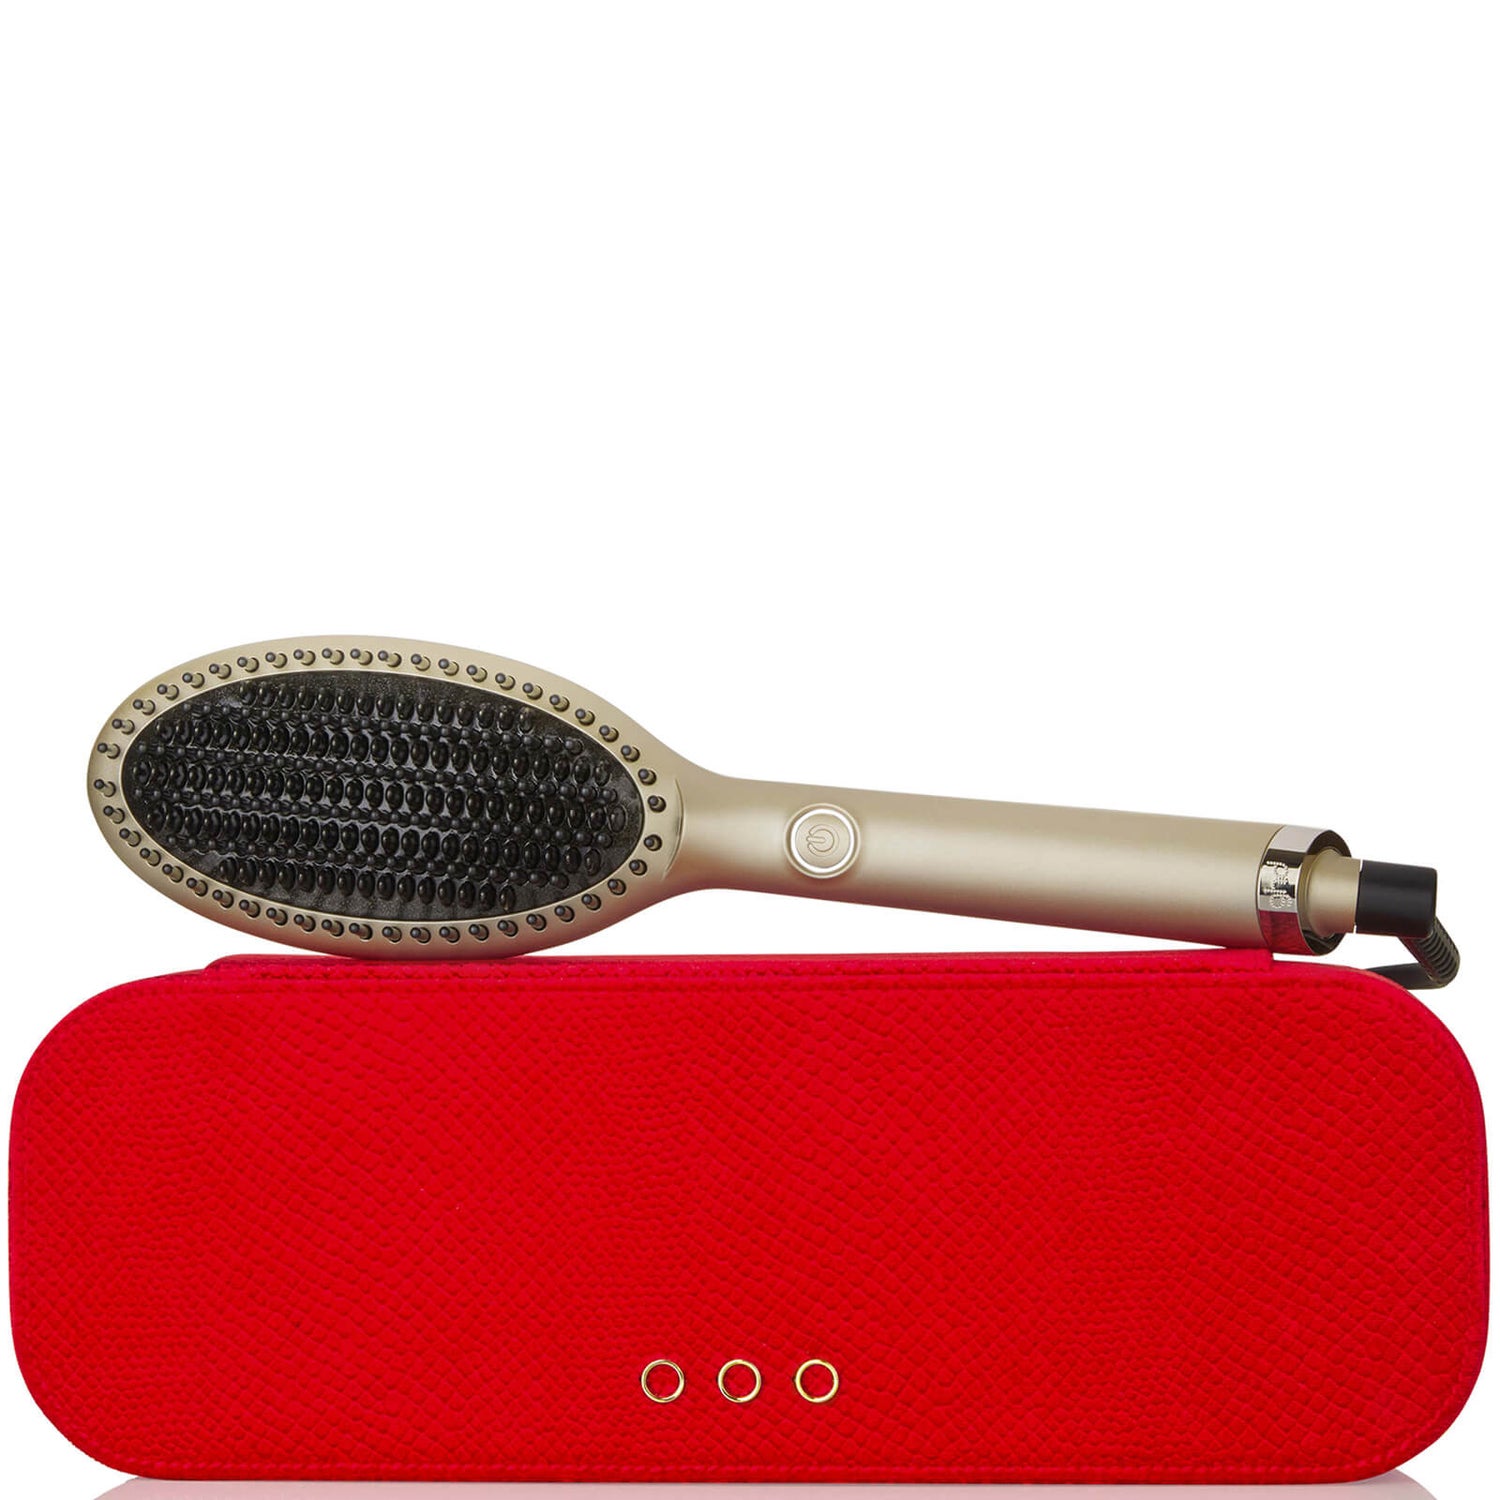 ghd Glide Smoothing Hot Brush - Grand-Luxe Collection (Worth $209.00)